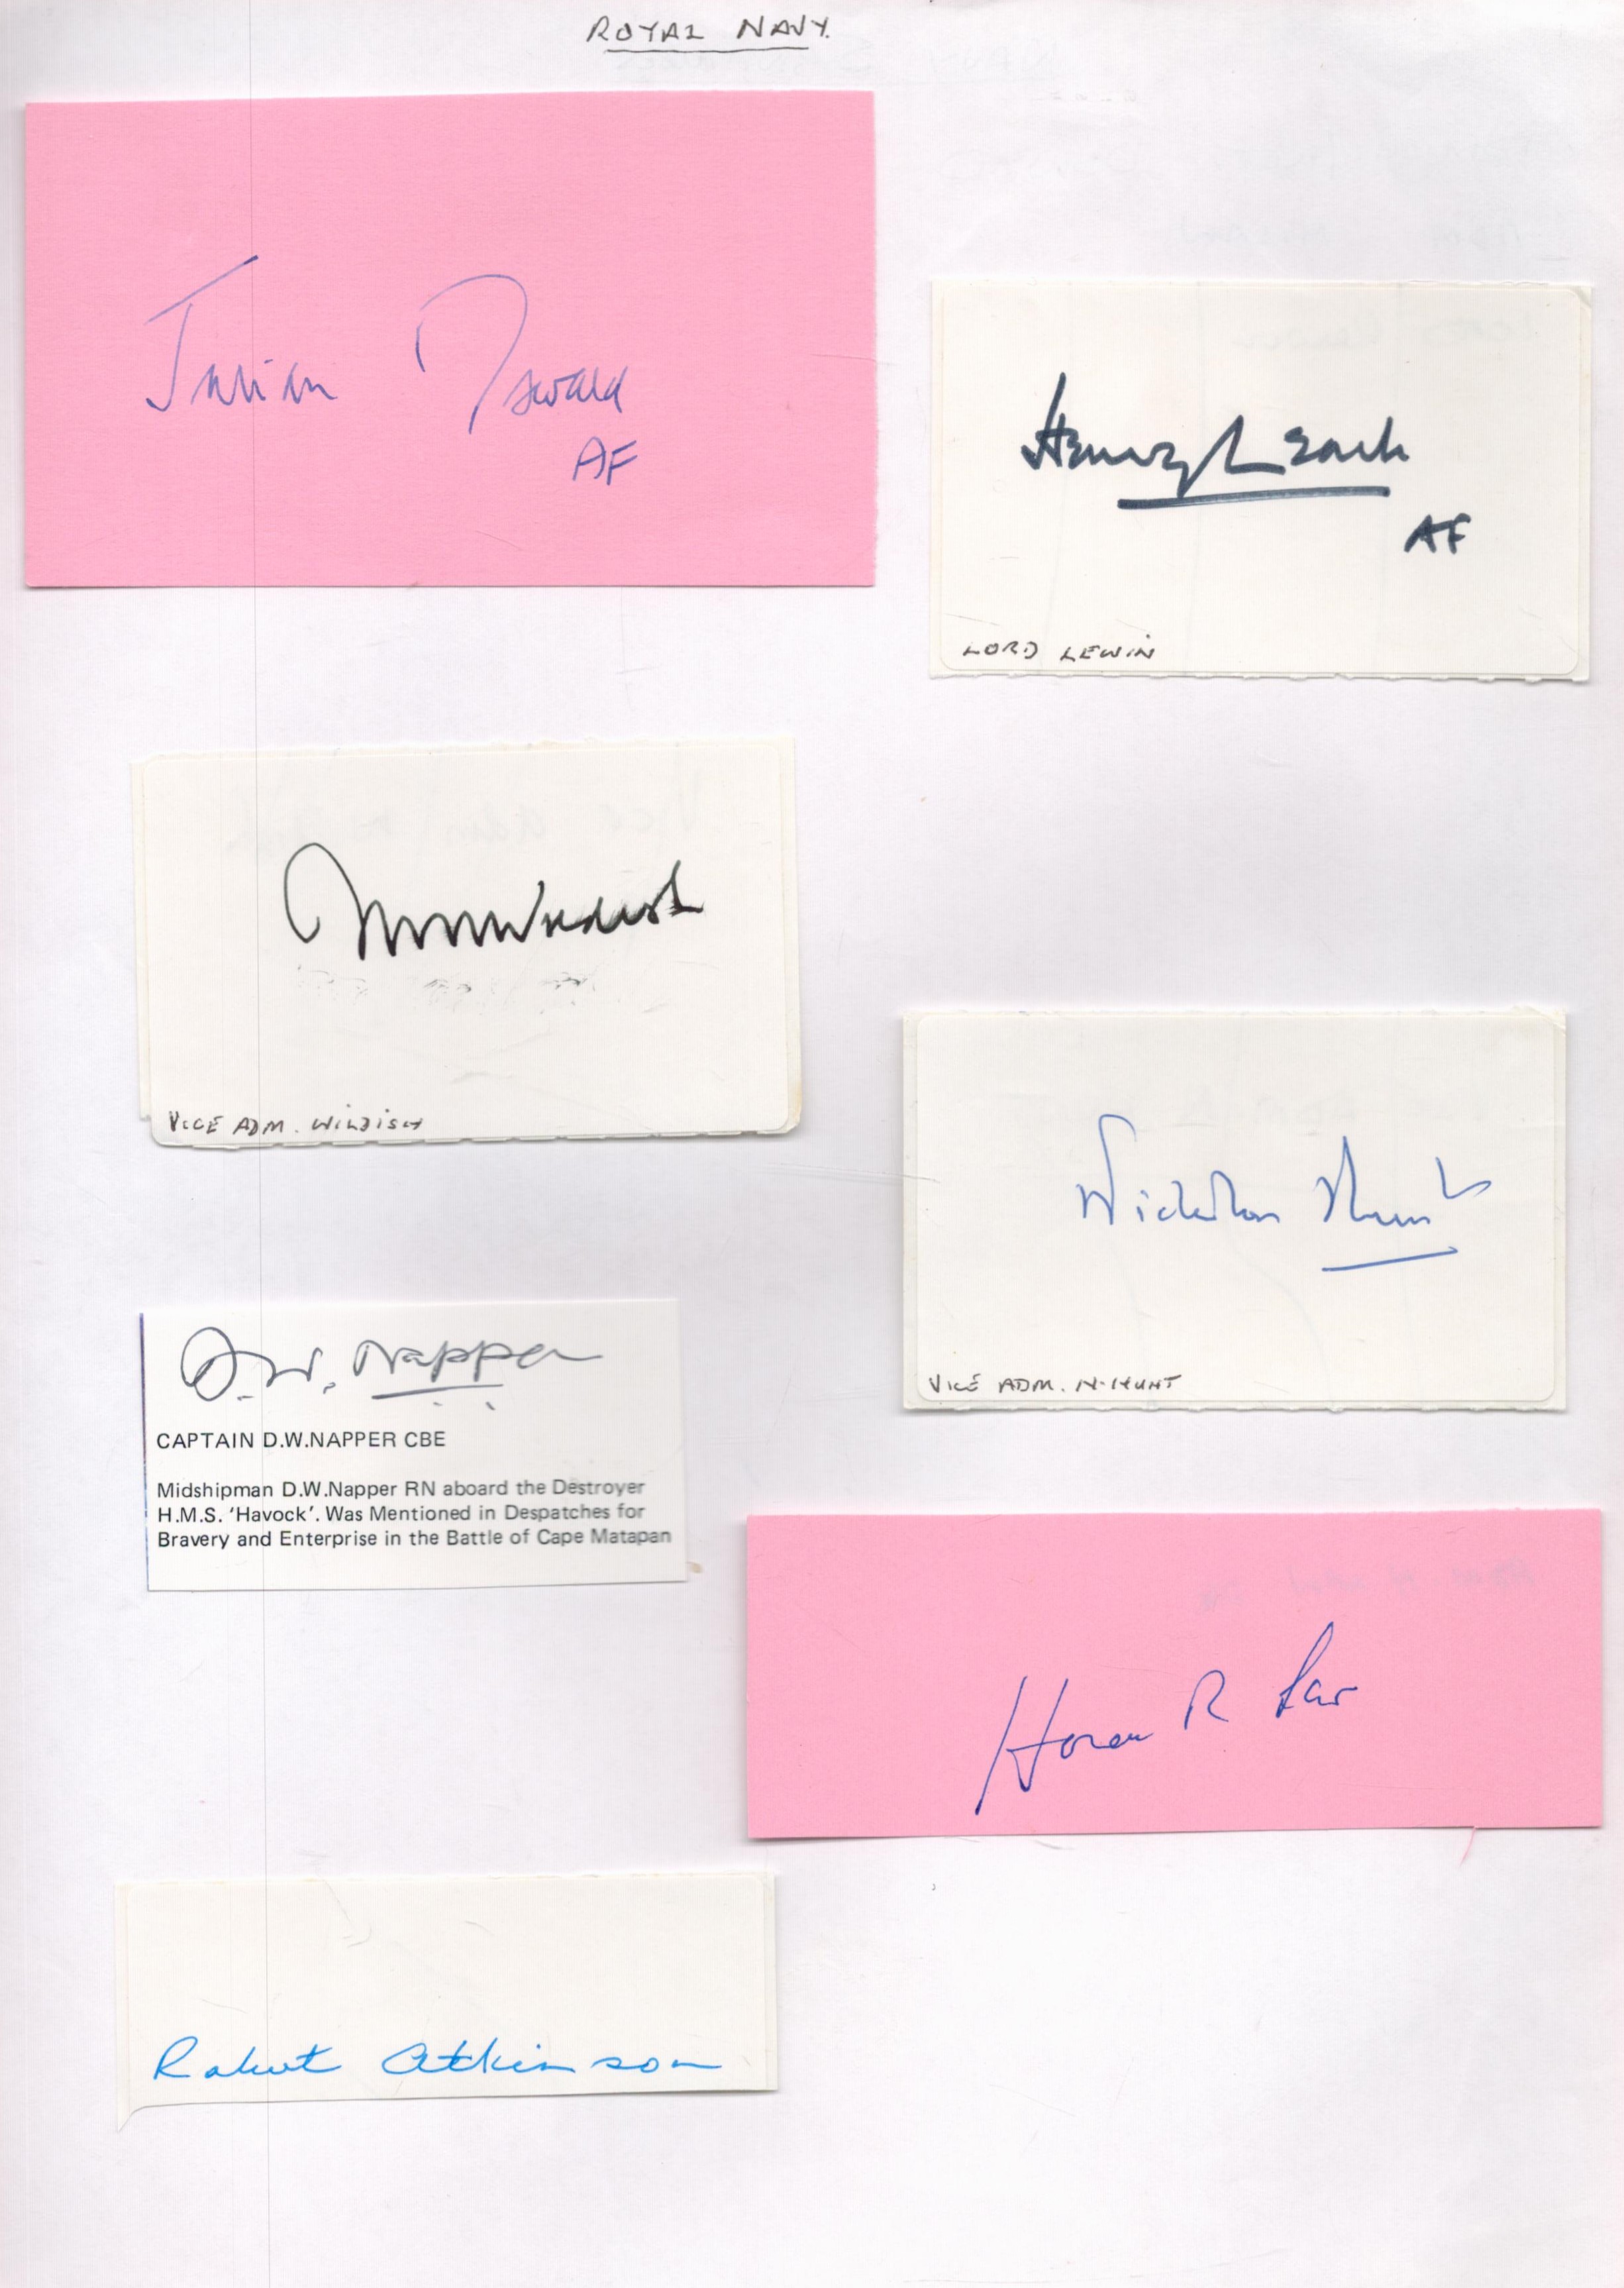 Royal Navy Collection of 7 Admiral Autographs. Signatories include Henry Leach, N Hunt, Robert